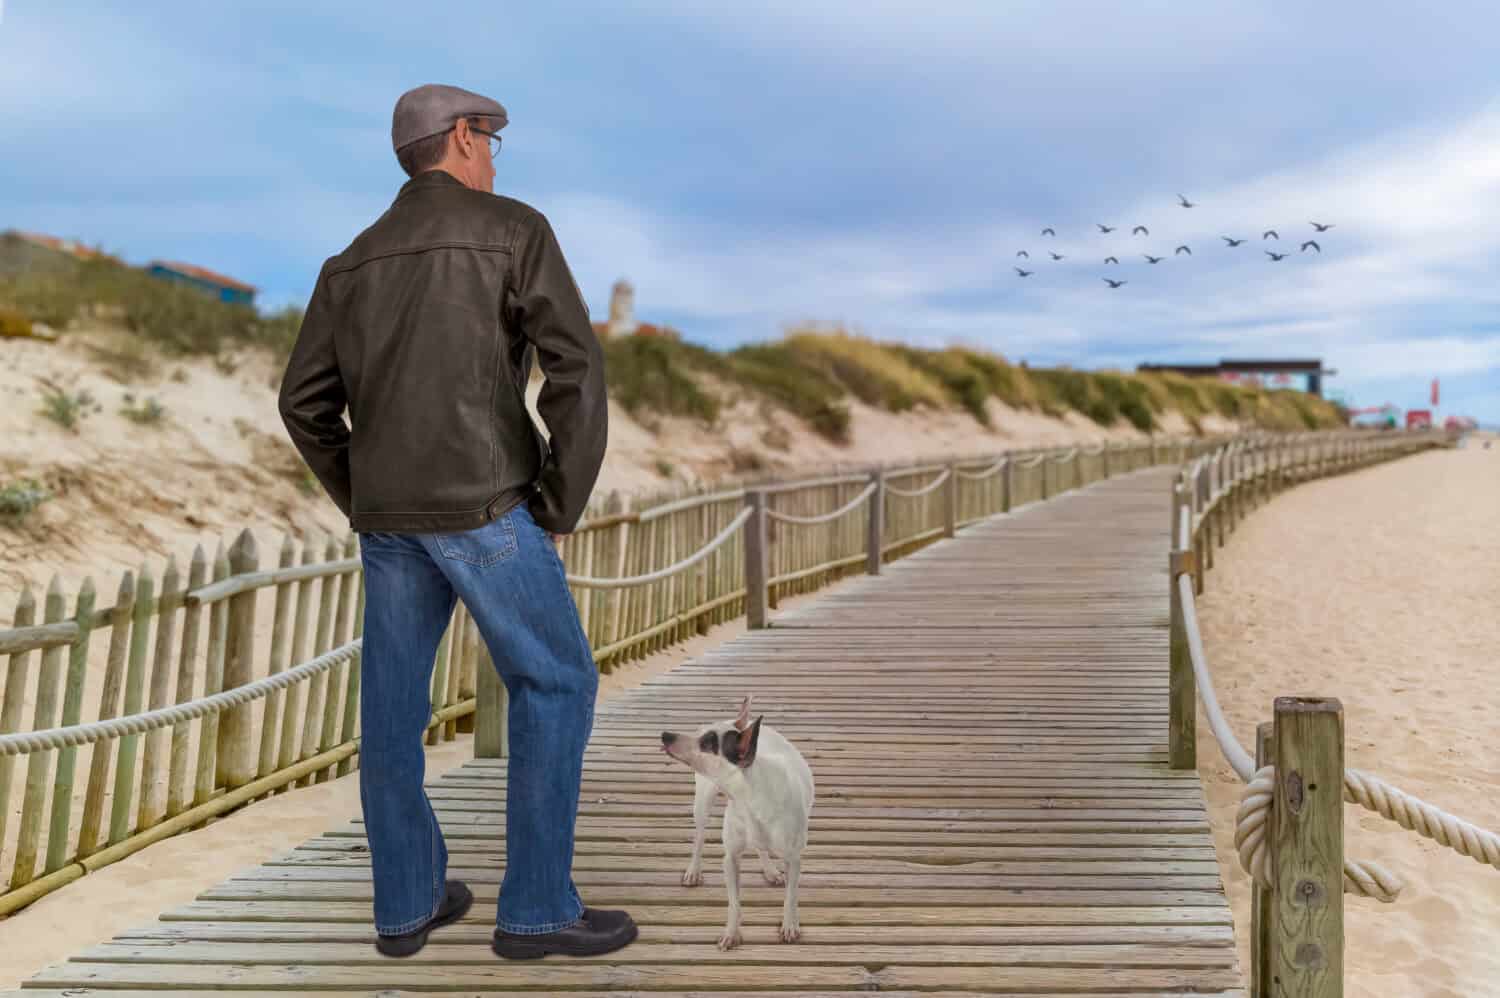 A man walks his dog off the leash on the boardwalk at the beach. He stops to look at the ocean while the white dog looks up at him for direction.